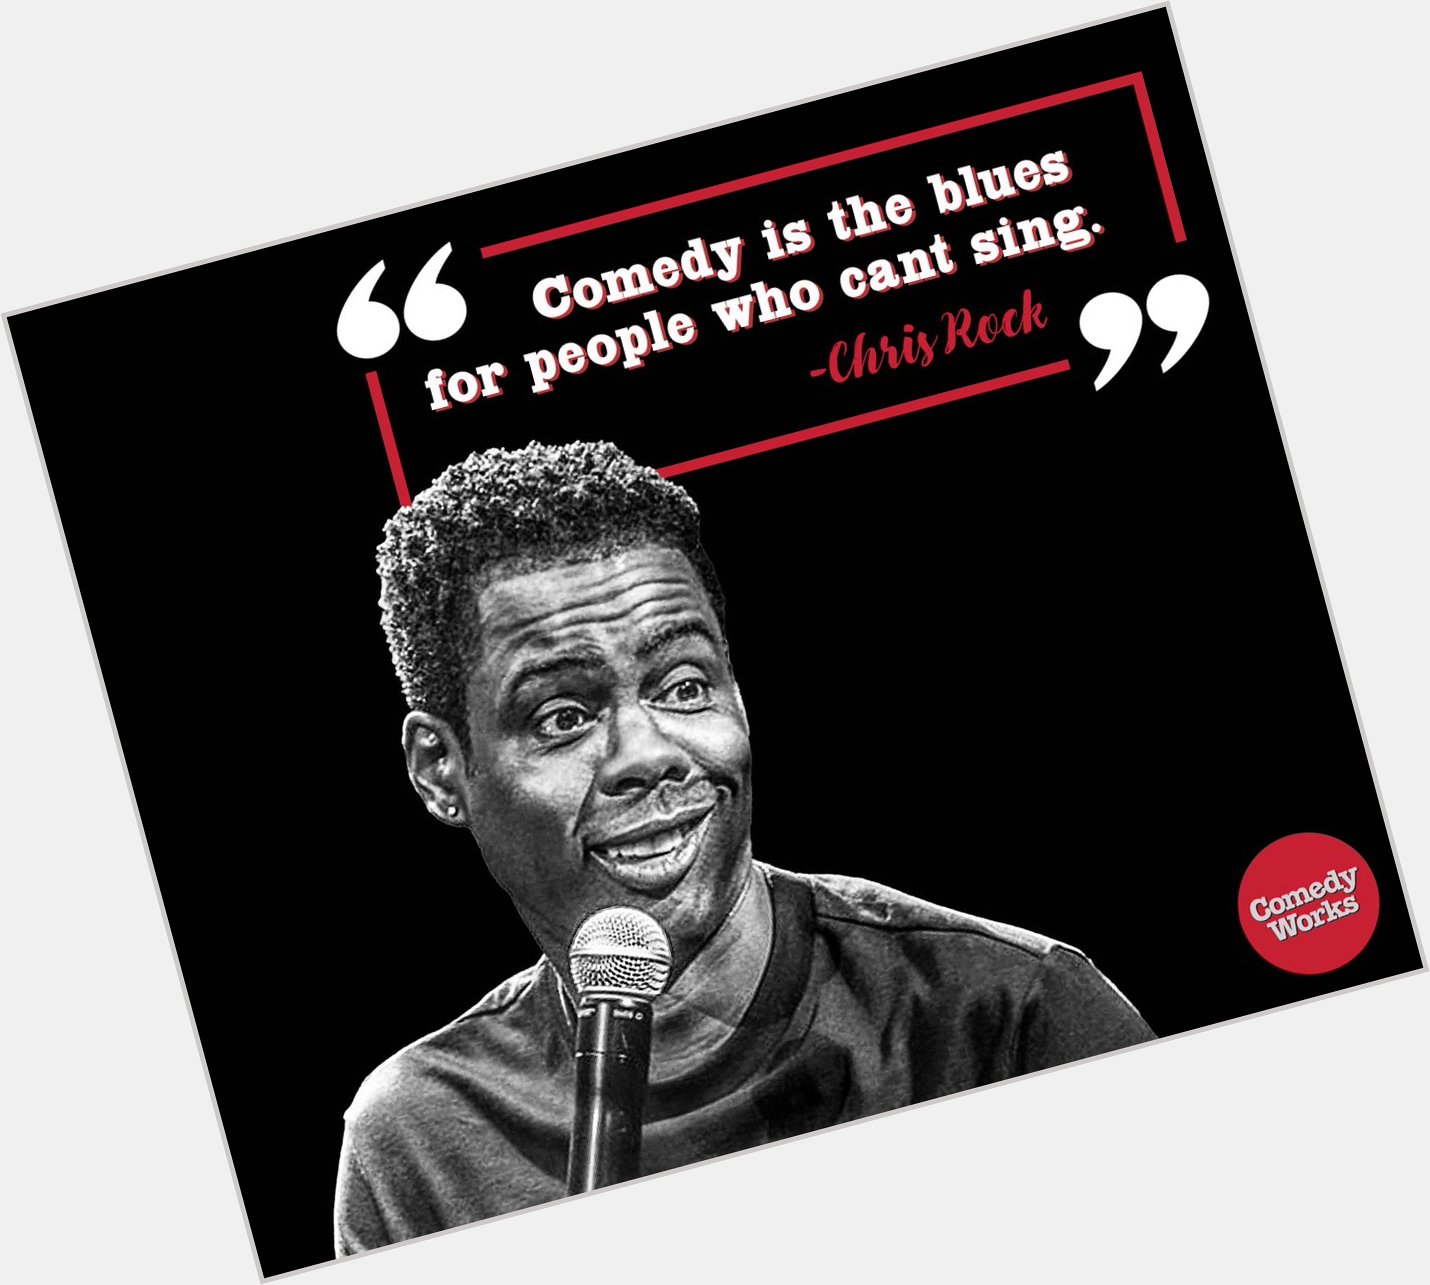 Happy 57th Birthday to one of the absolute best - Chris Rock!

We re all lucky you can t sing. 